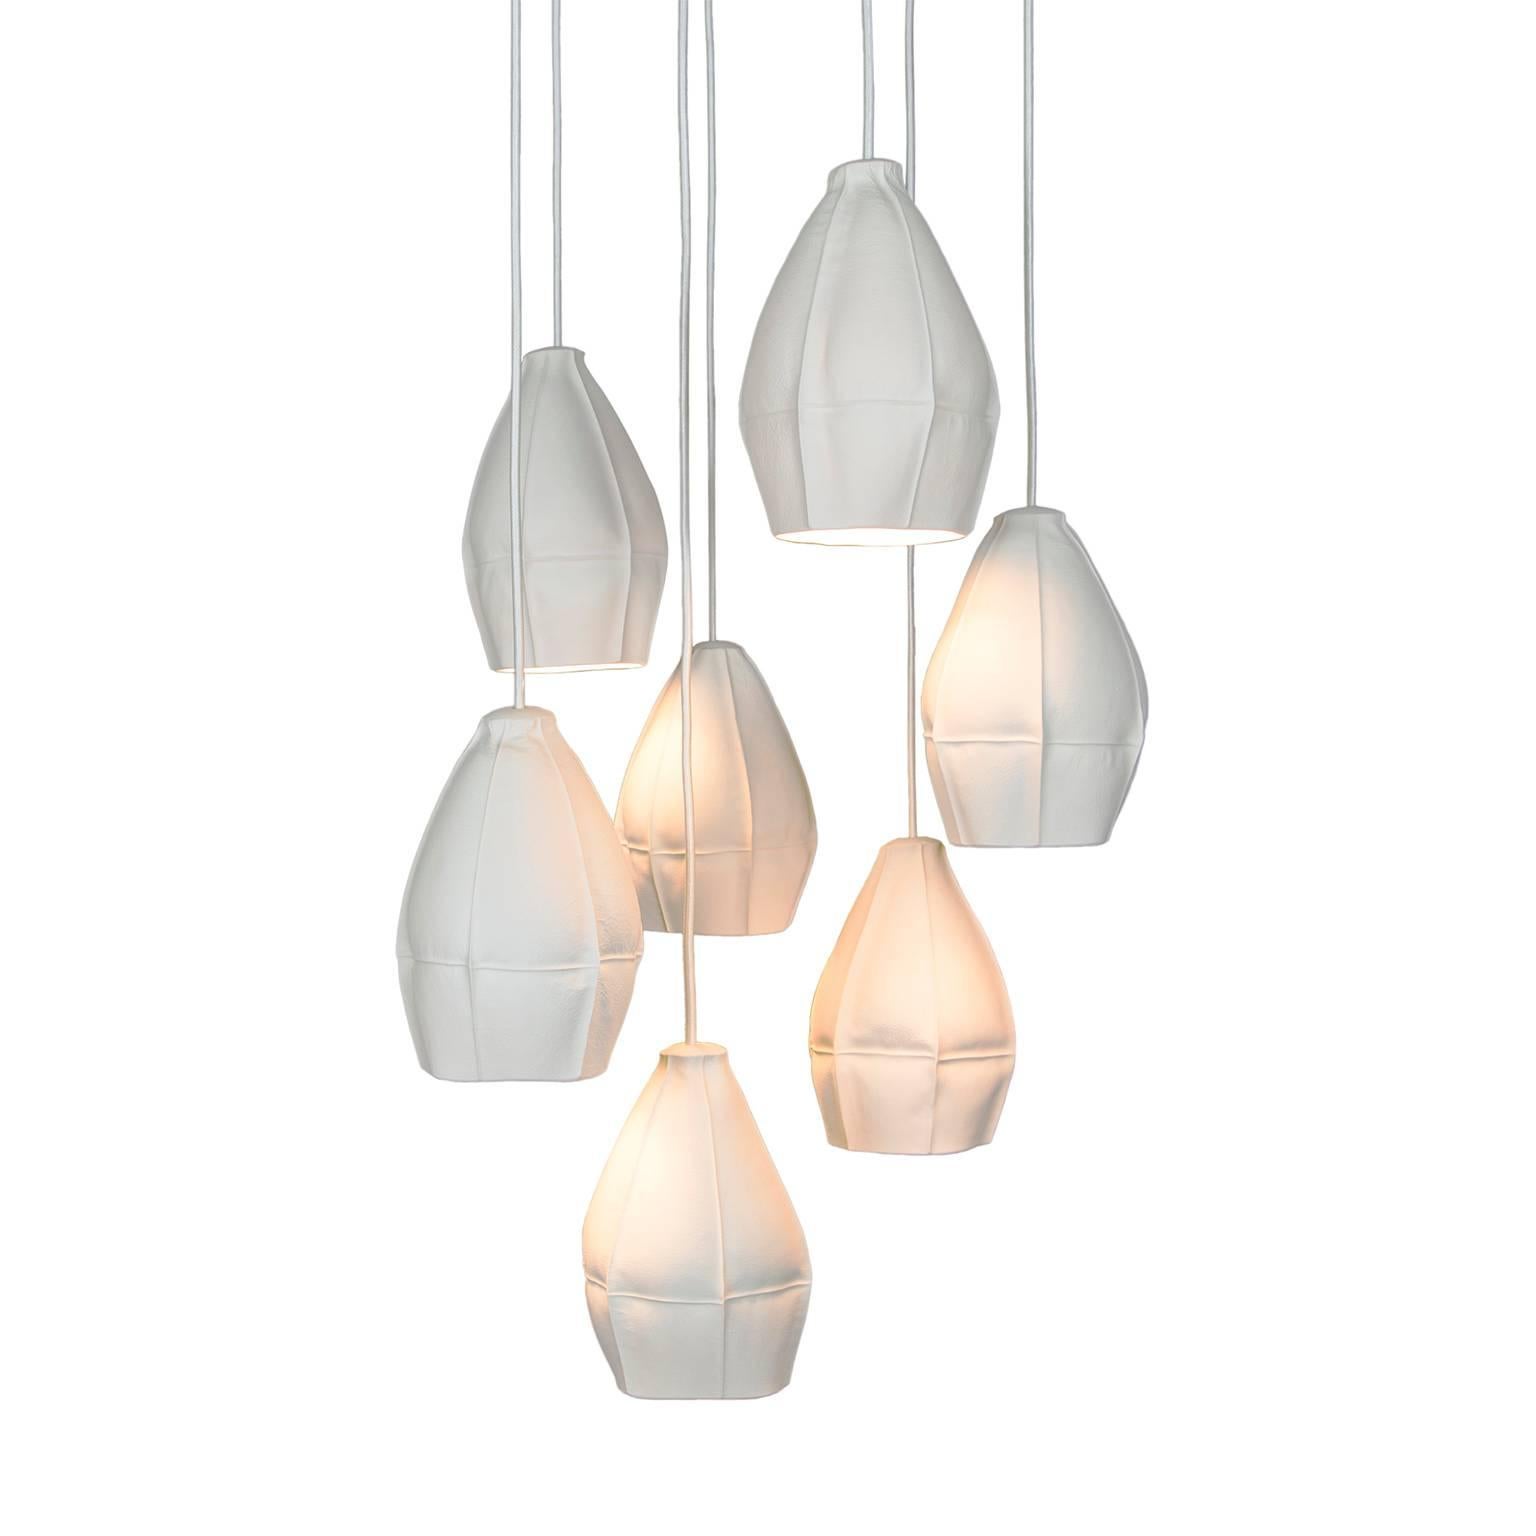 Souda's Kawa Pendant Lights are slip cast porcelain directly into dozens of leather molds resulting in highly-unique ceramic shades. The finalized pendant lights are dynamic and highly-unusual, emitting a soft glow that works well individually or in